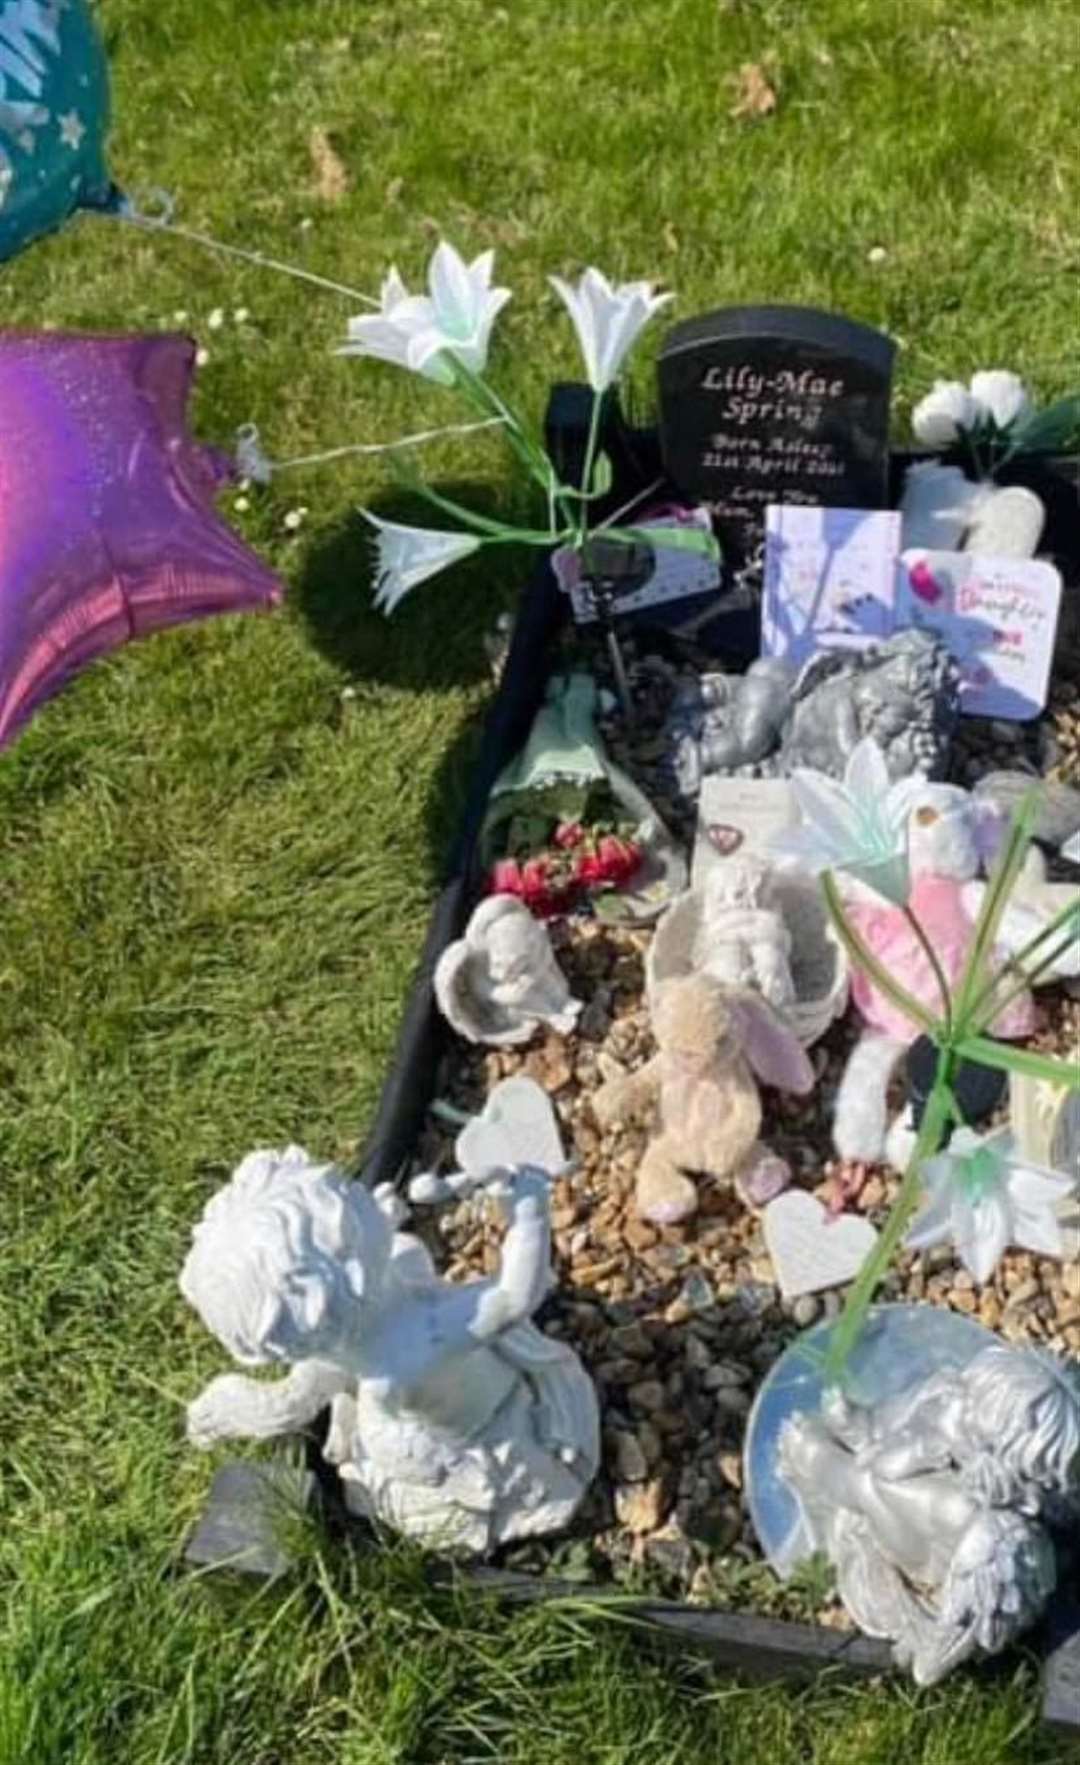 Lily-Mae Spring's grave was decorated with flowers, stuffed toys and ornaments before being vandalised. Picture: Shannon Spring